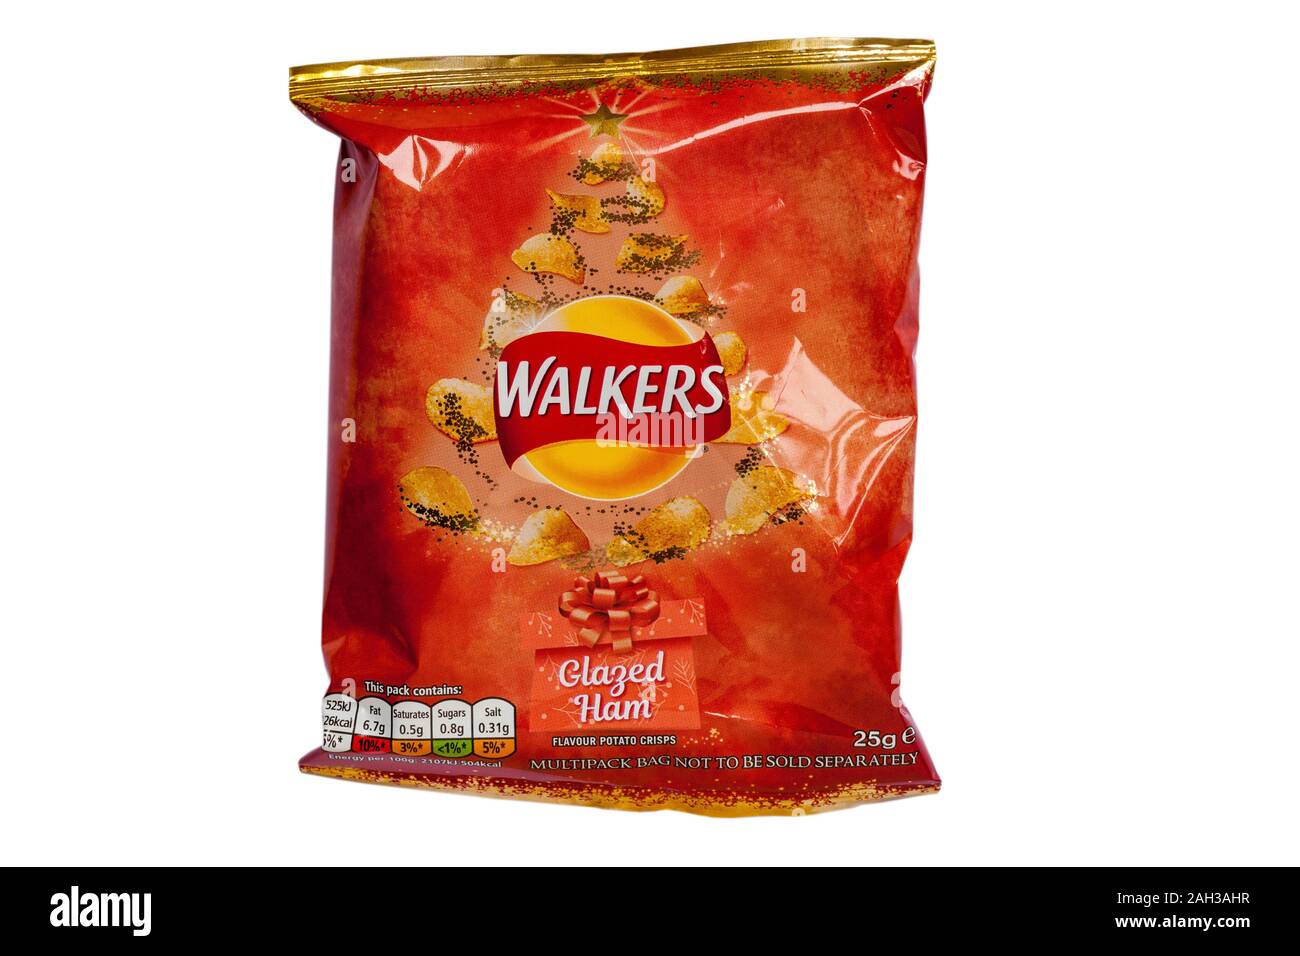 Packet of Walkers Glazed Ham flavour potato crisps from Multipack bag of Walkers  Christmas Dinner for Sprout Haters crisps isolated on white Stock Photo -  Alamy